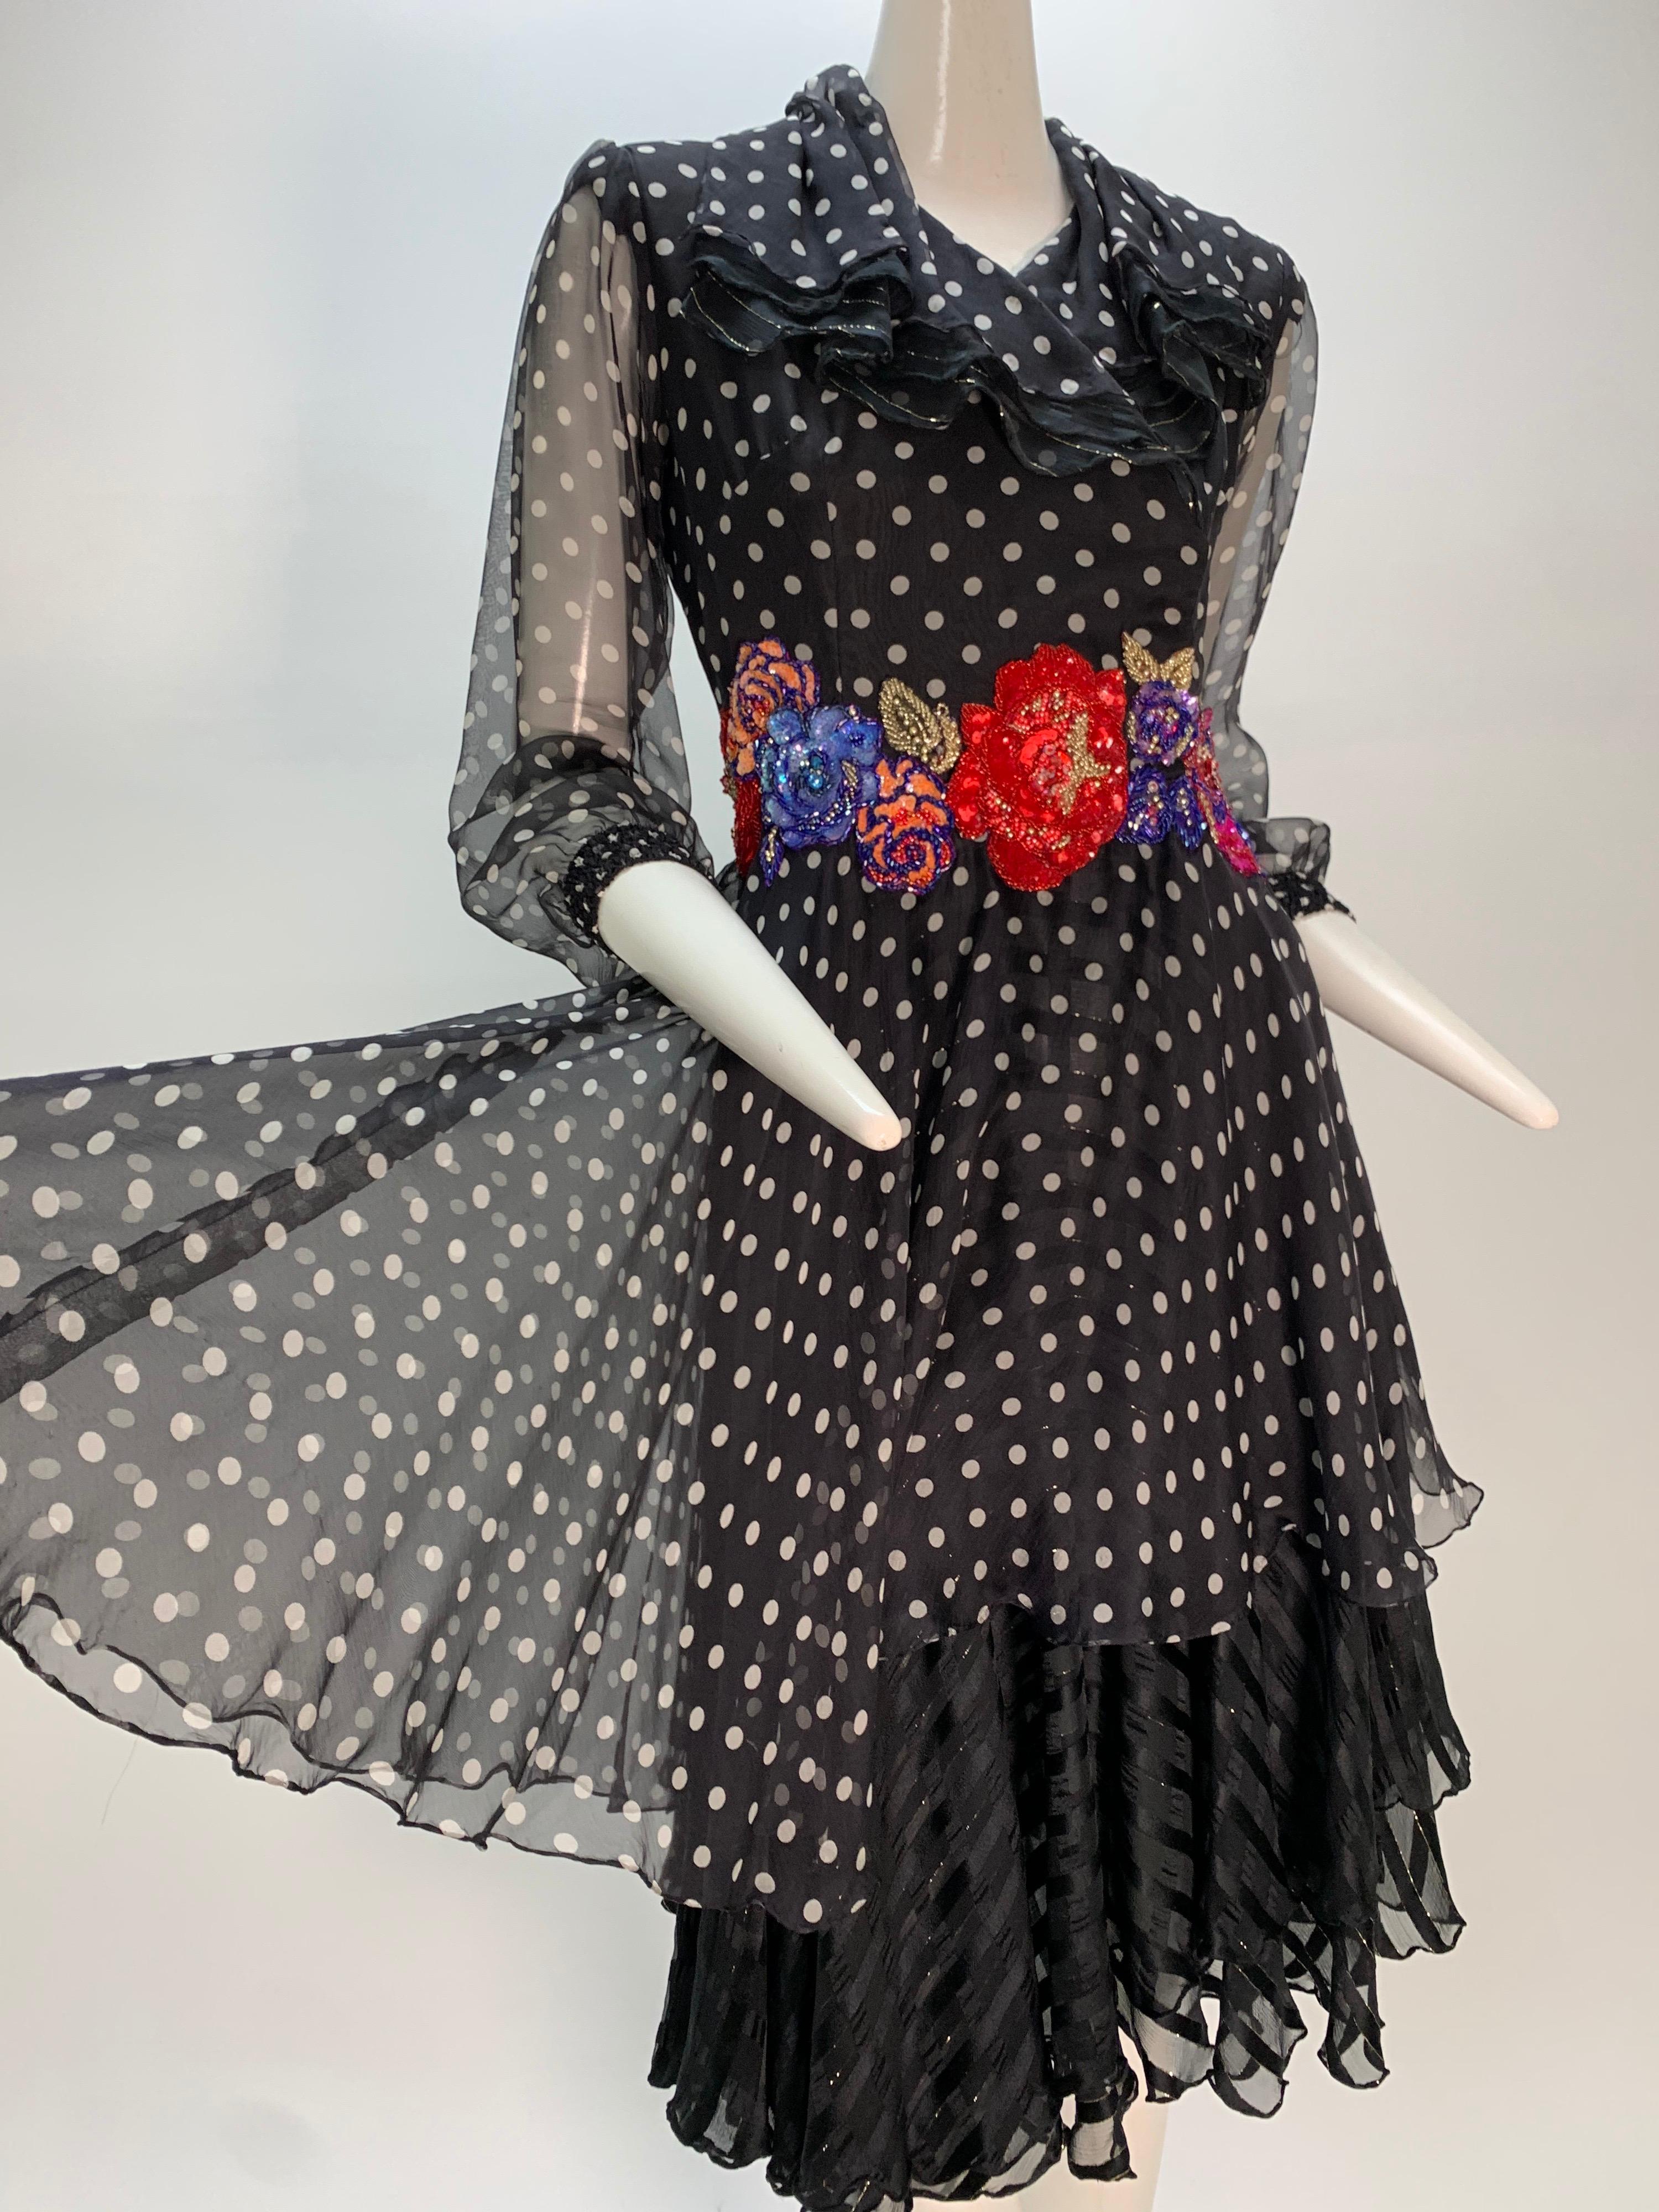 A whimsical 1980s polka dot silk chiffon dress with colorful beaded roses at waistband: a fun flurry of patterns with an asymmetrical hemline that shows the lattice-patterned underskirts. Collar is multi-tiered with chiffon shot through with a gold